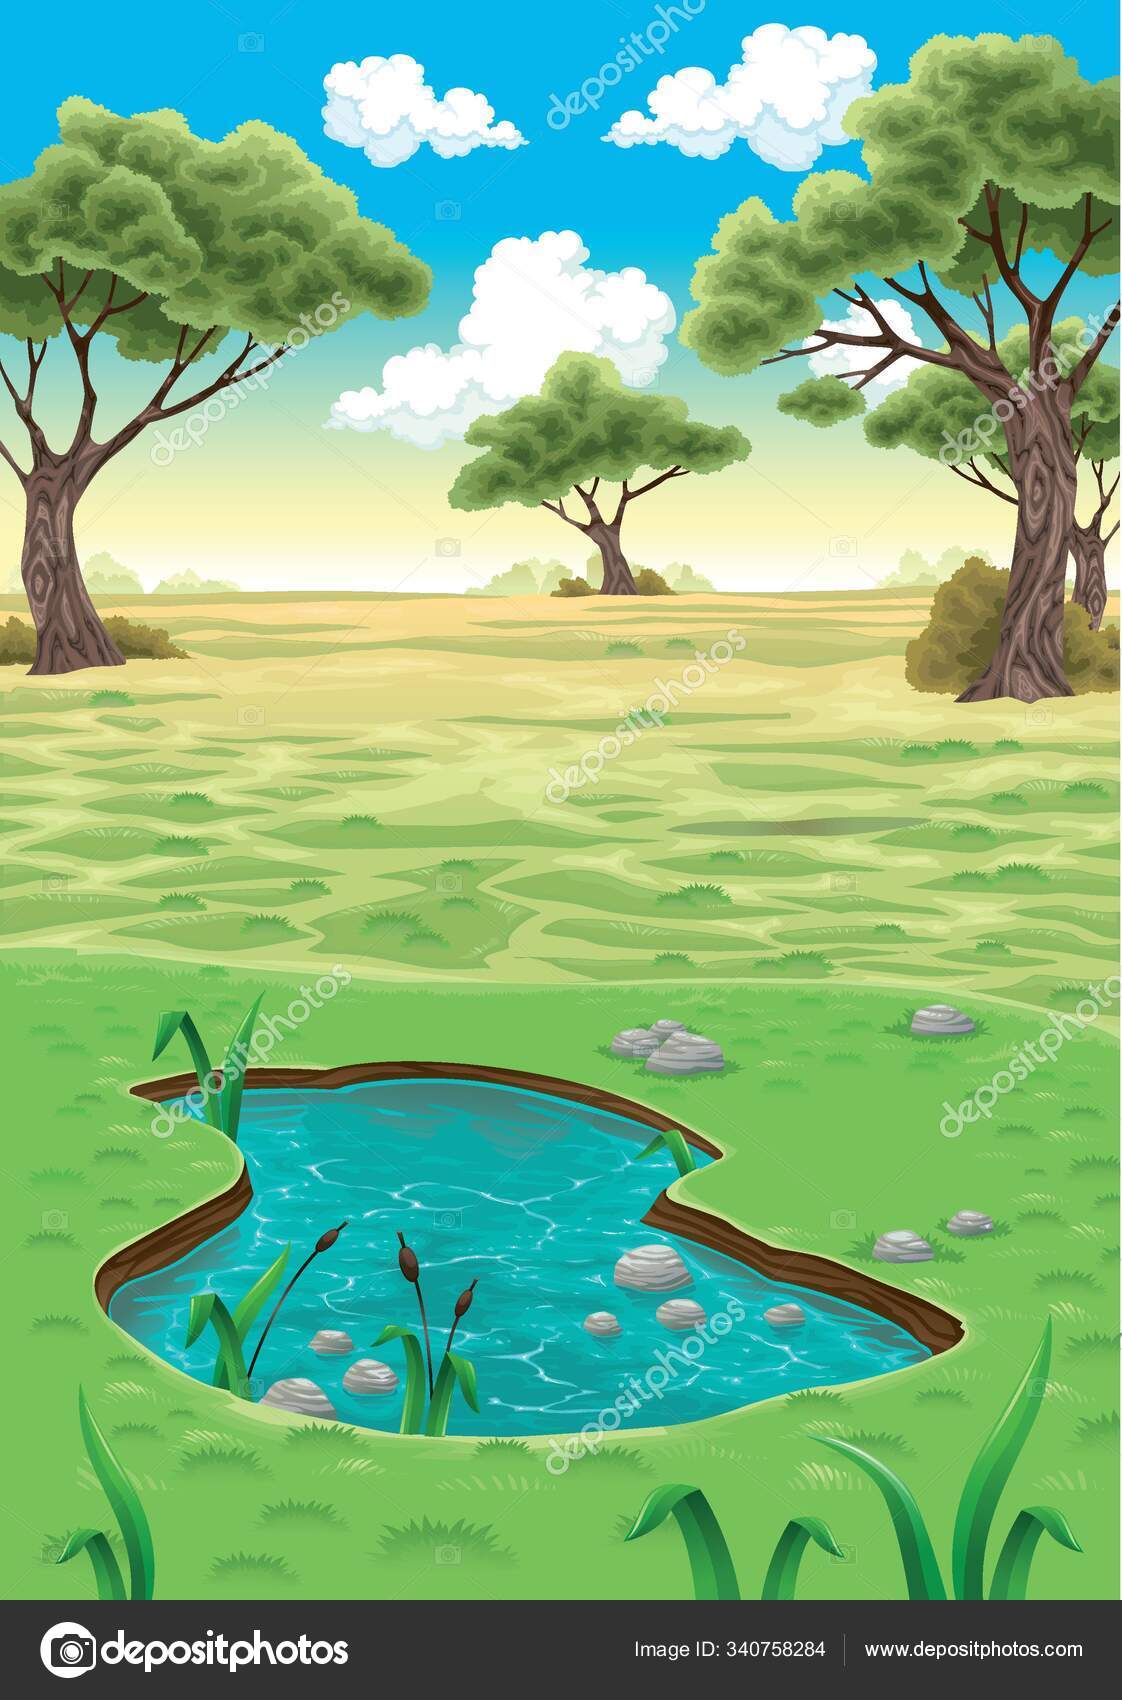 ecosystem of pond picture clipart